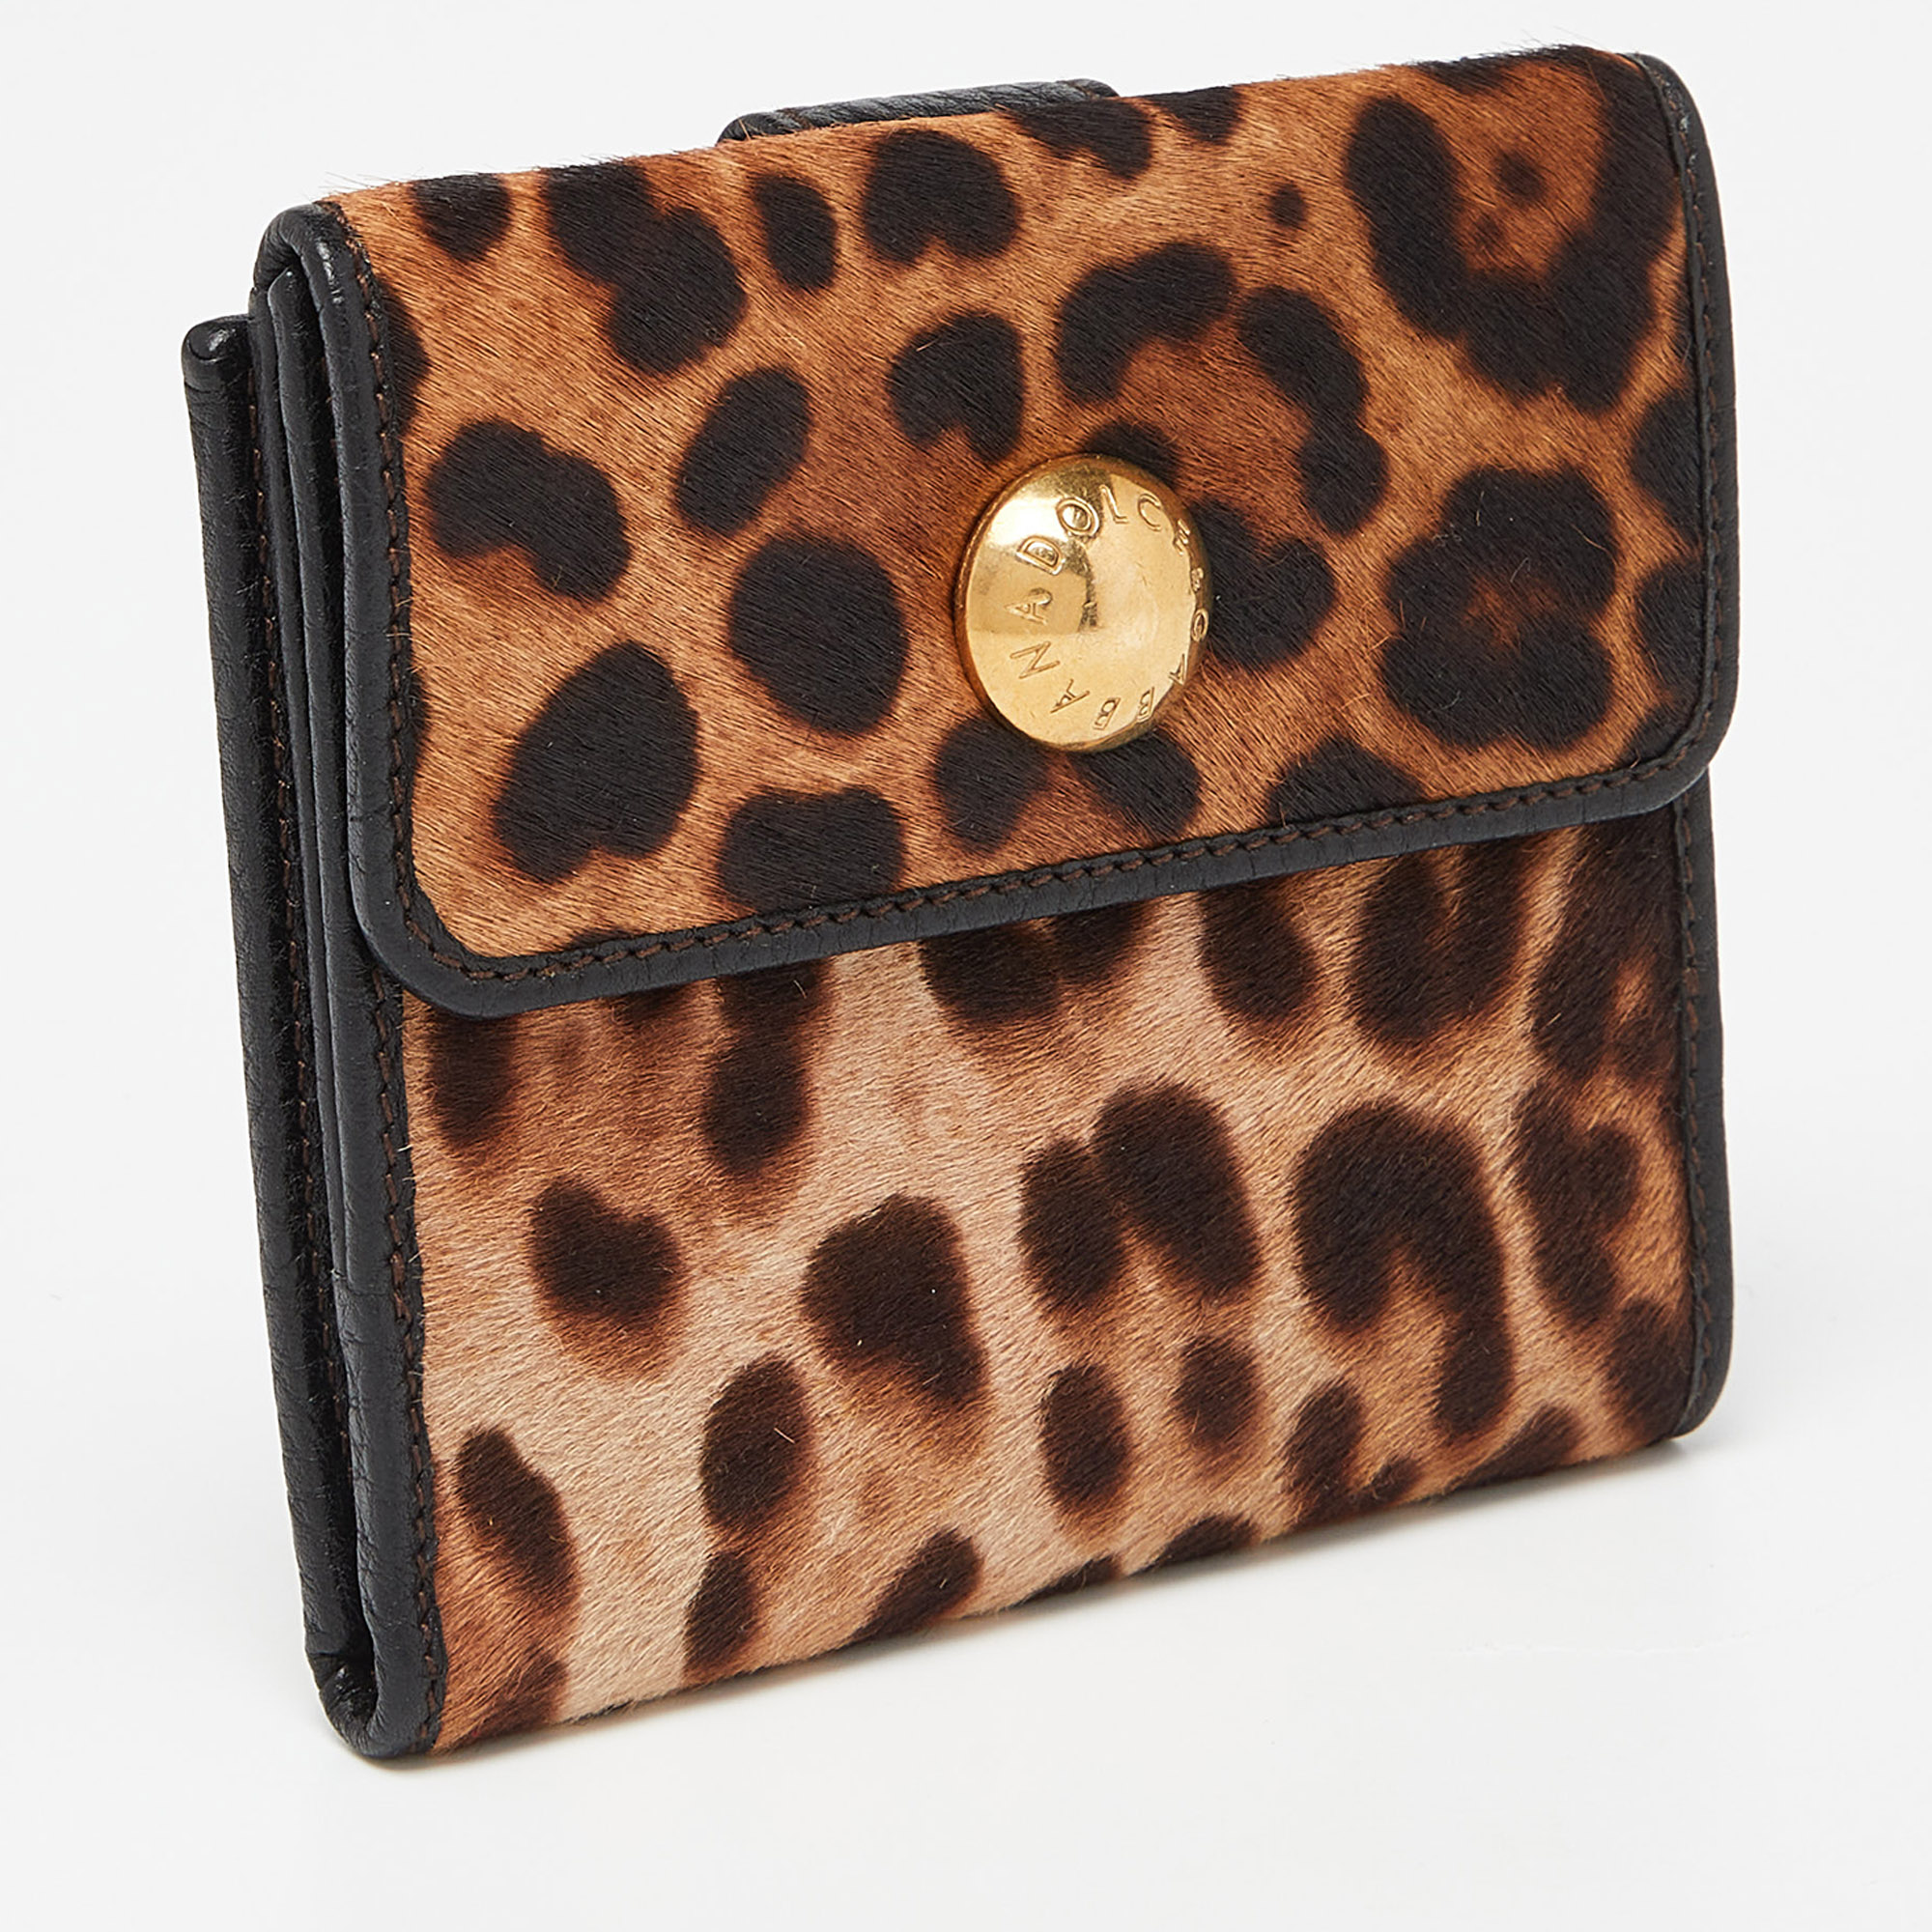 Dolce & Gabbana Brown Leopard Print Calfhair And Leather French Wallet